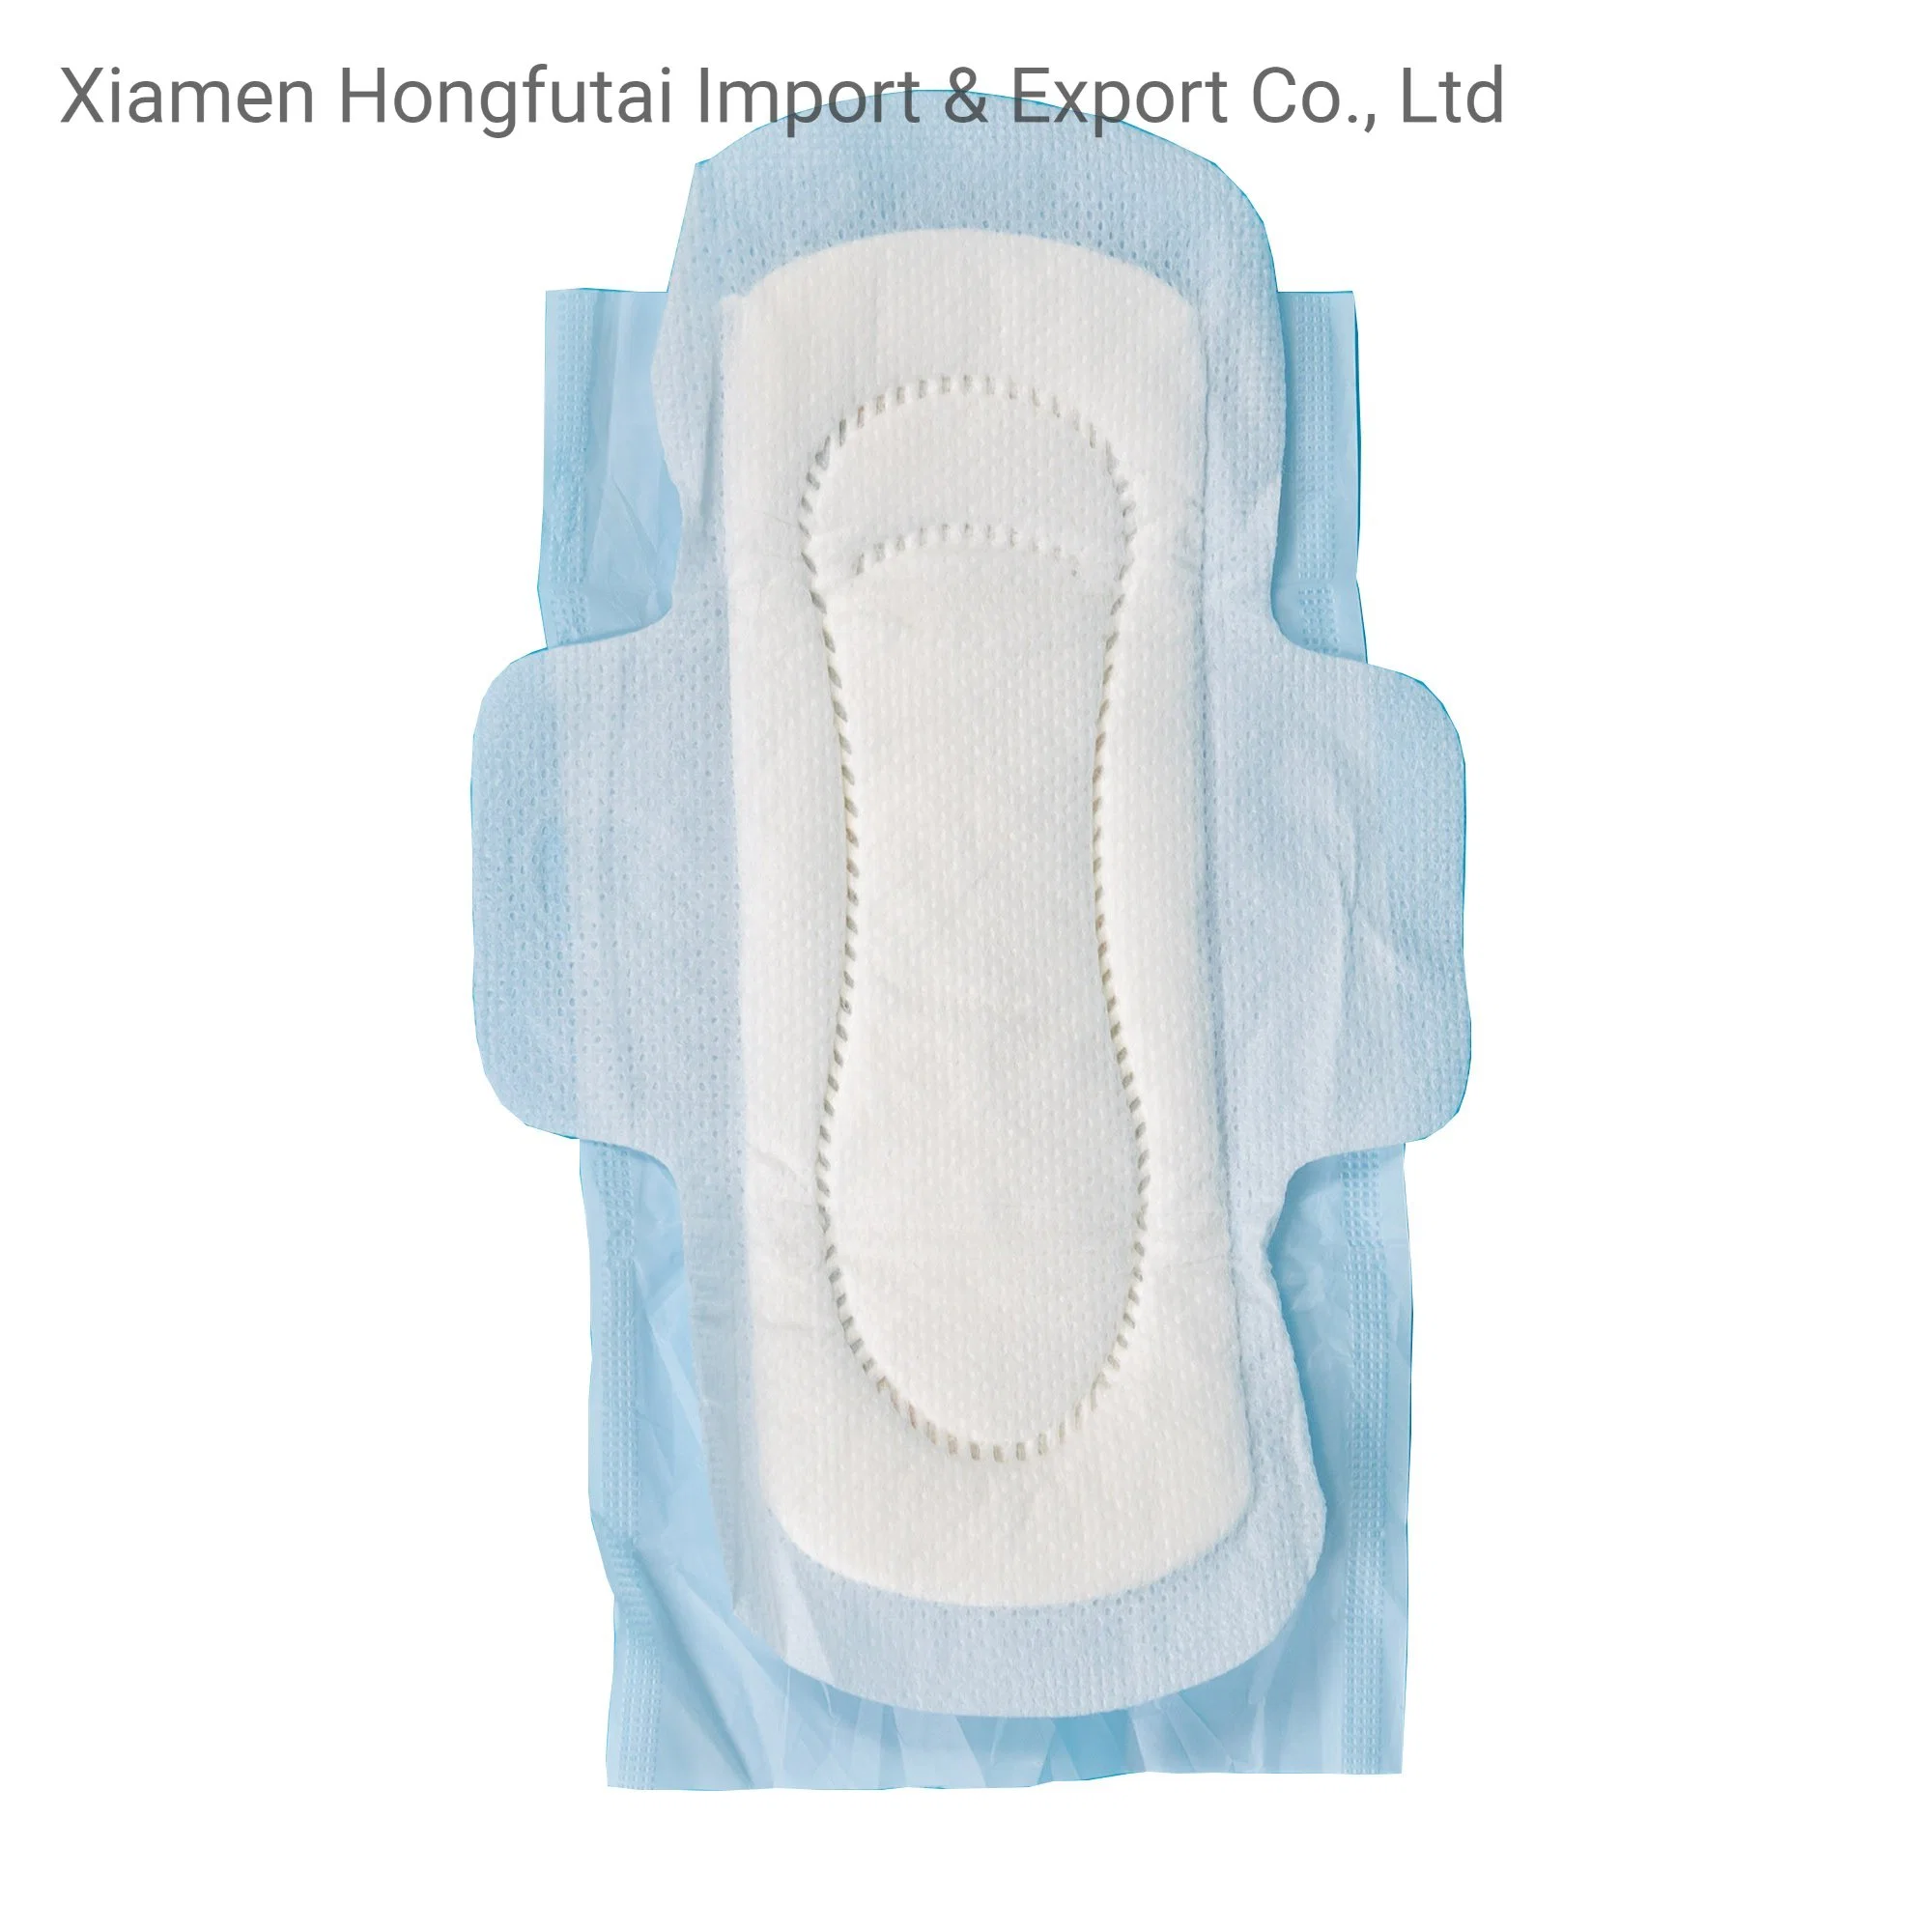 Premium Quality Cotton High Absorbency Comfortable Full Sizes Non Woven Daily Use Shymoon Anion Disposable Fragrance Sanitary Napkin Pads